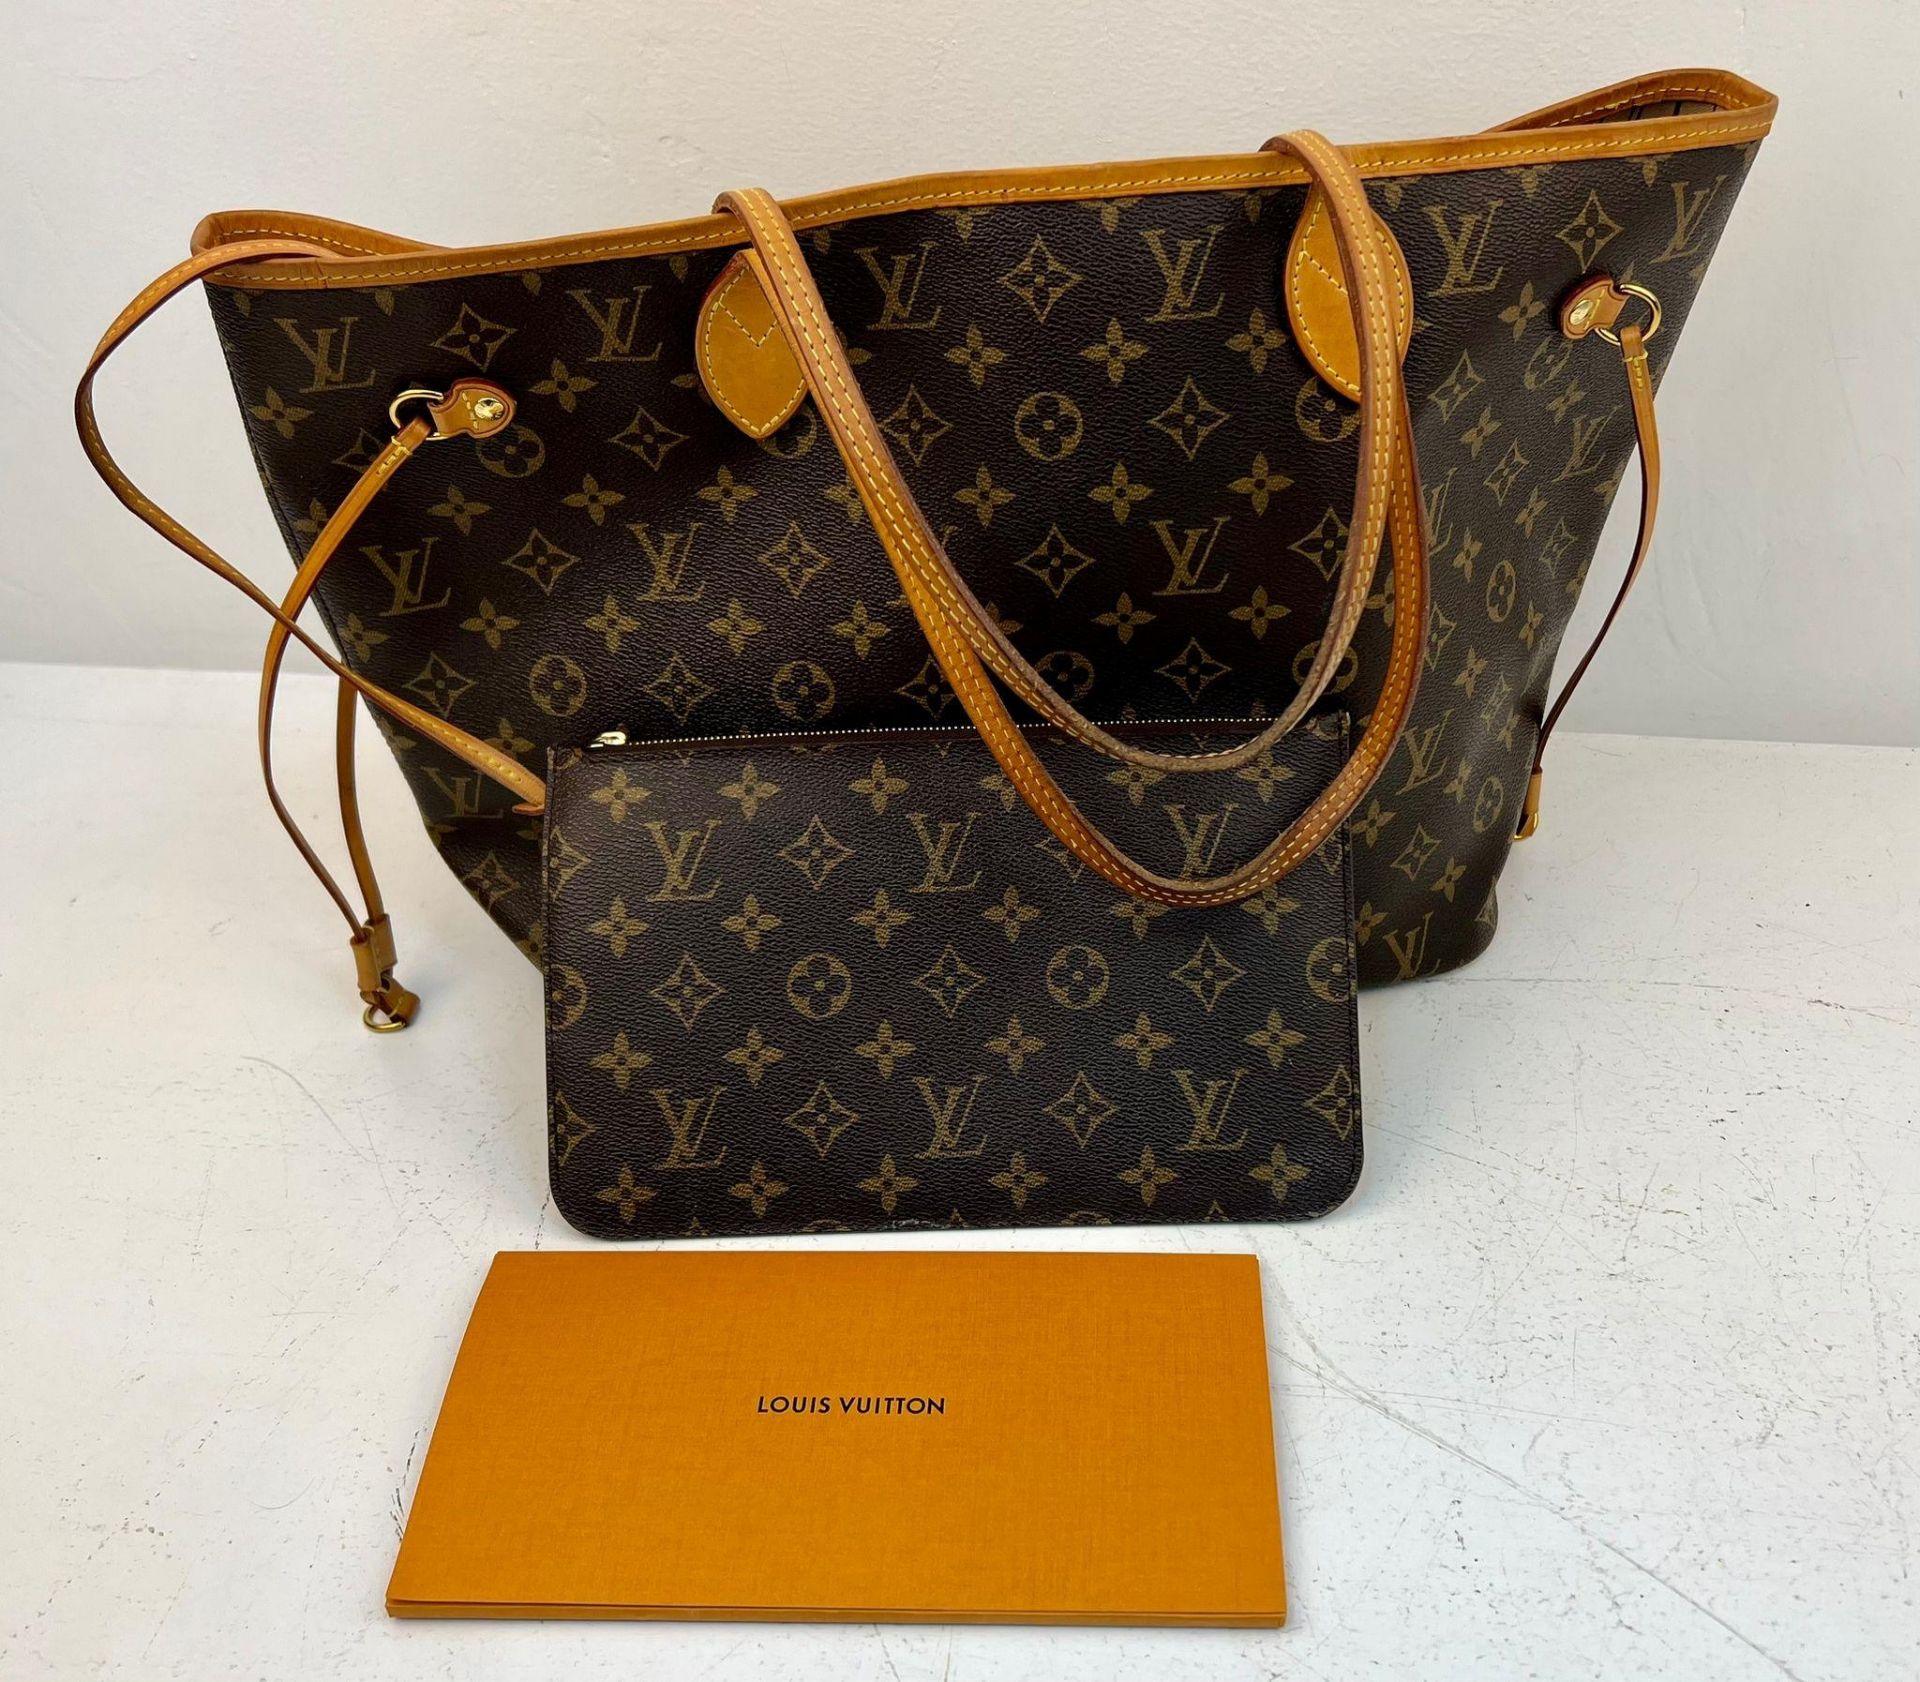 A Louis Vuitton Neverfull Tote Bag And LV Pouch! Brown monogram canvas exterior with leather handles